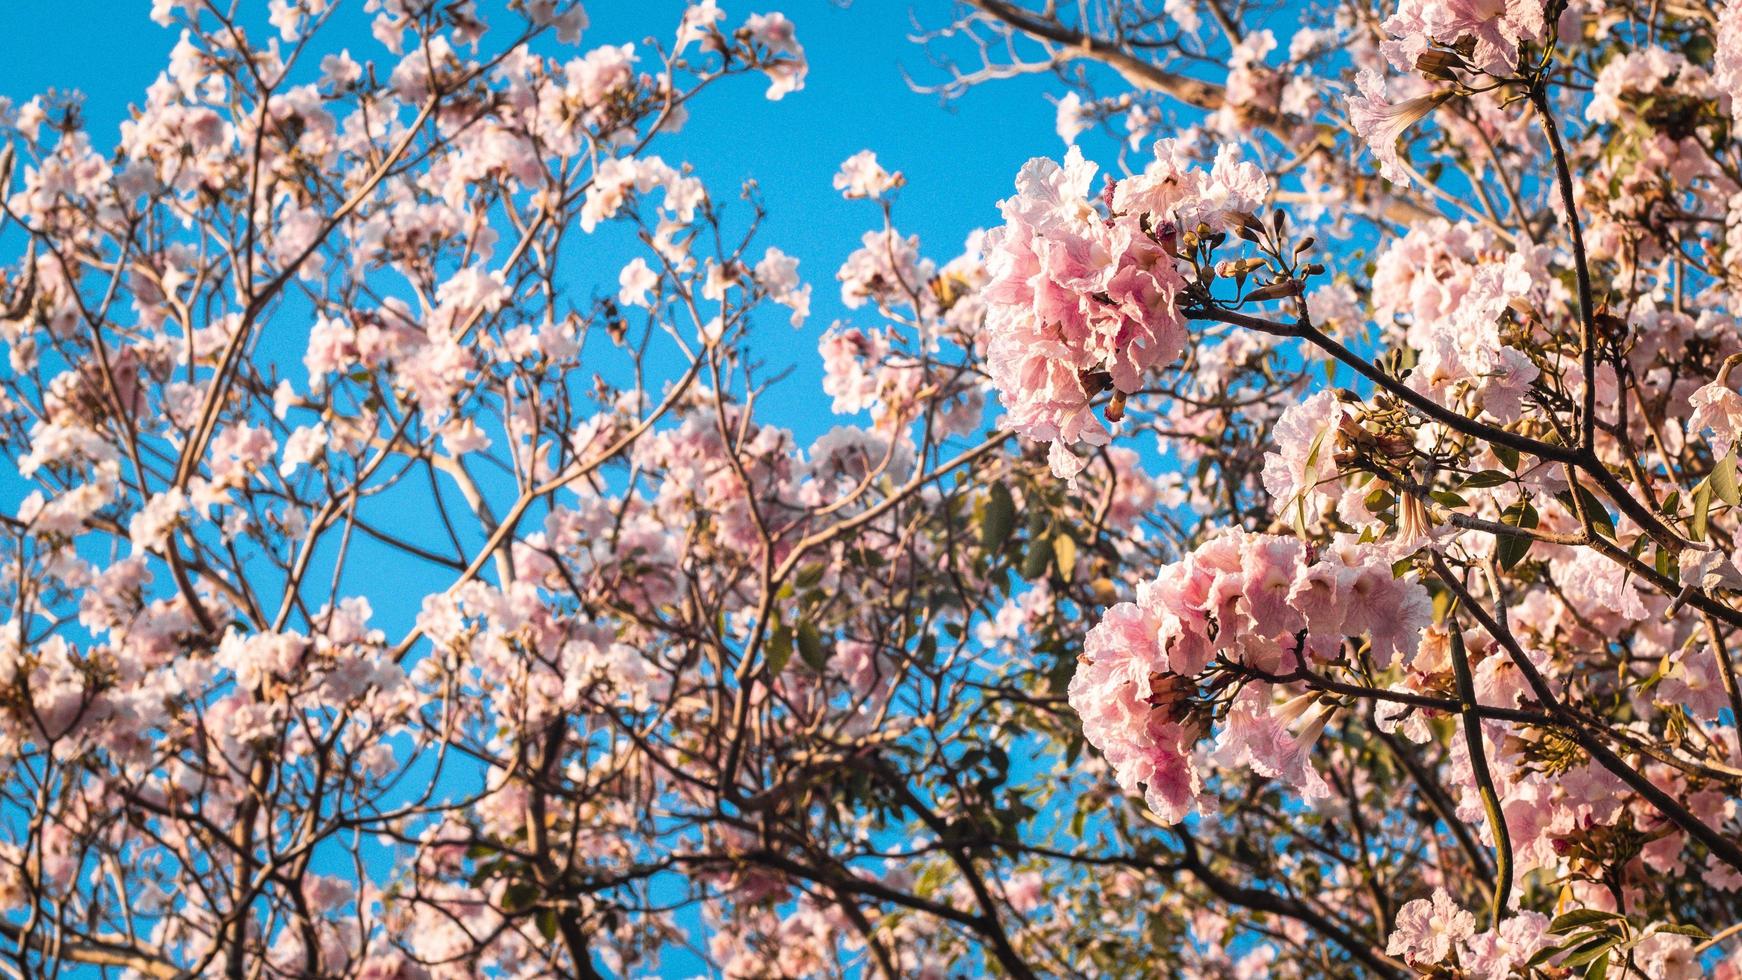 close up beautiful landscape of spring with pink flower .Blooming tree twigs .pink flowers blooming on tree in springtime .Beautiful cherry blossom sakura in spring time over blue sky. 5158734